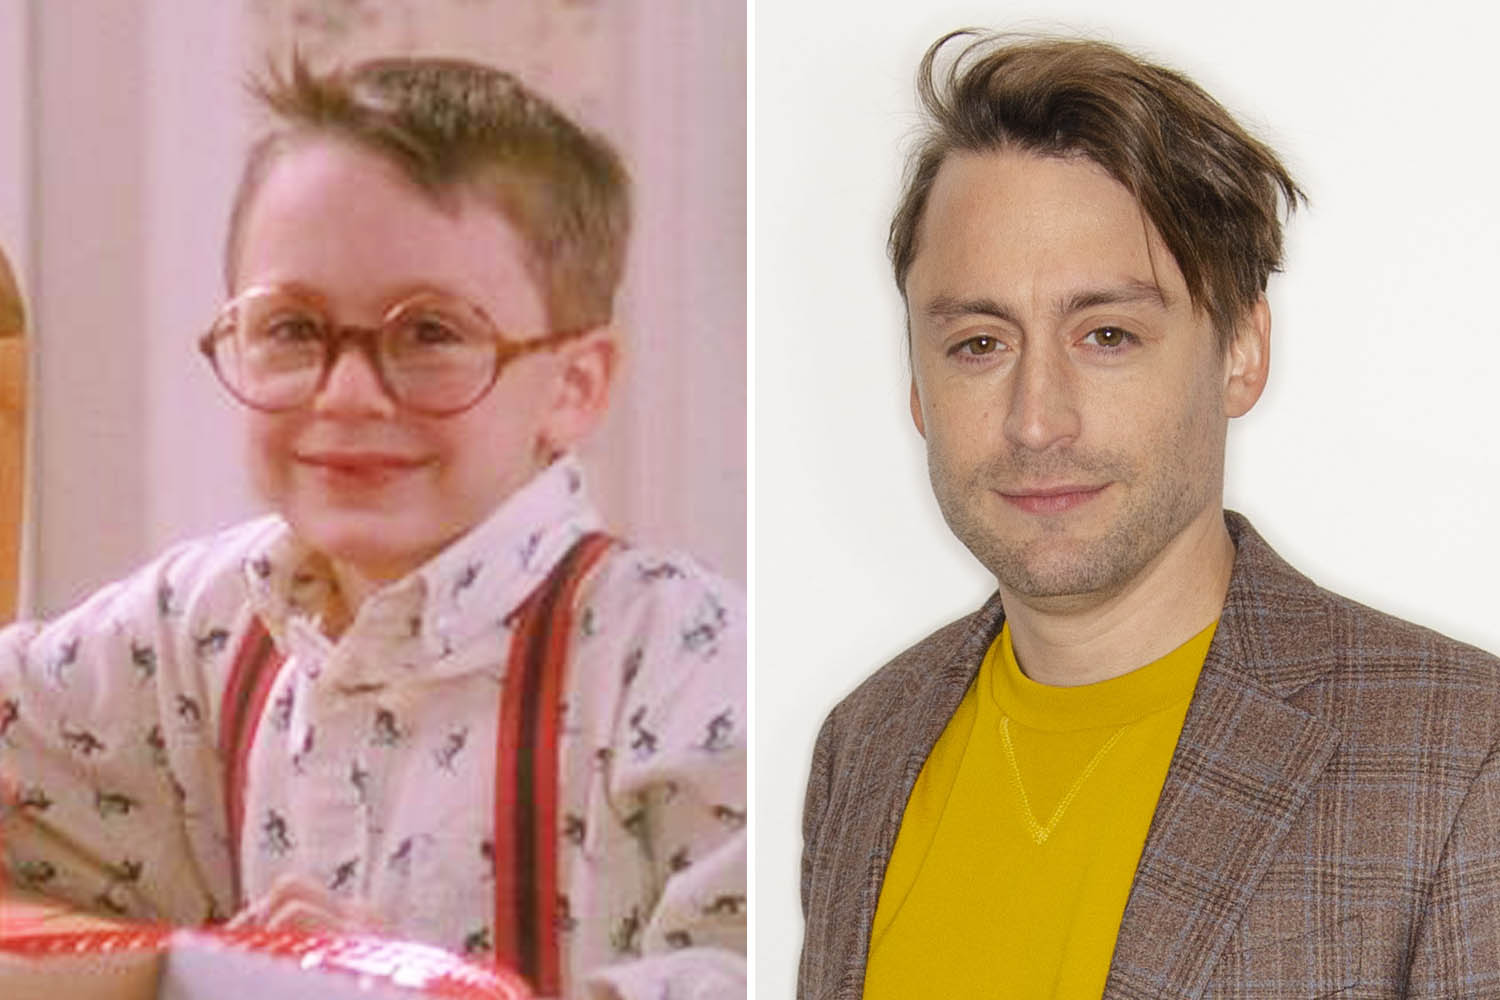 Macaulay got to work alongside his young brother Kieran in the film, however, his sibling has also seen plenty of success